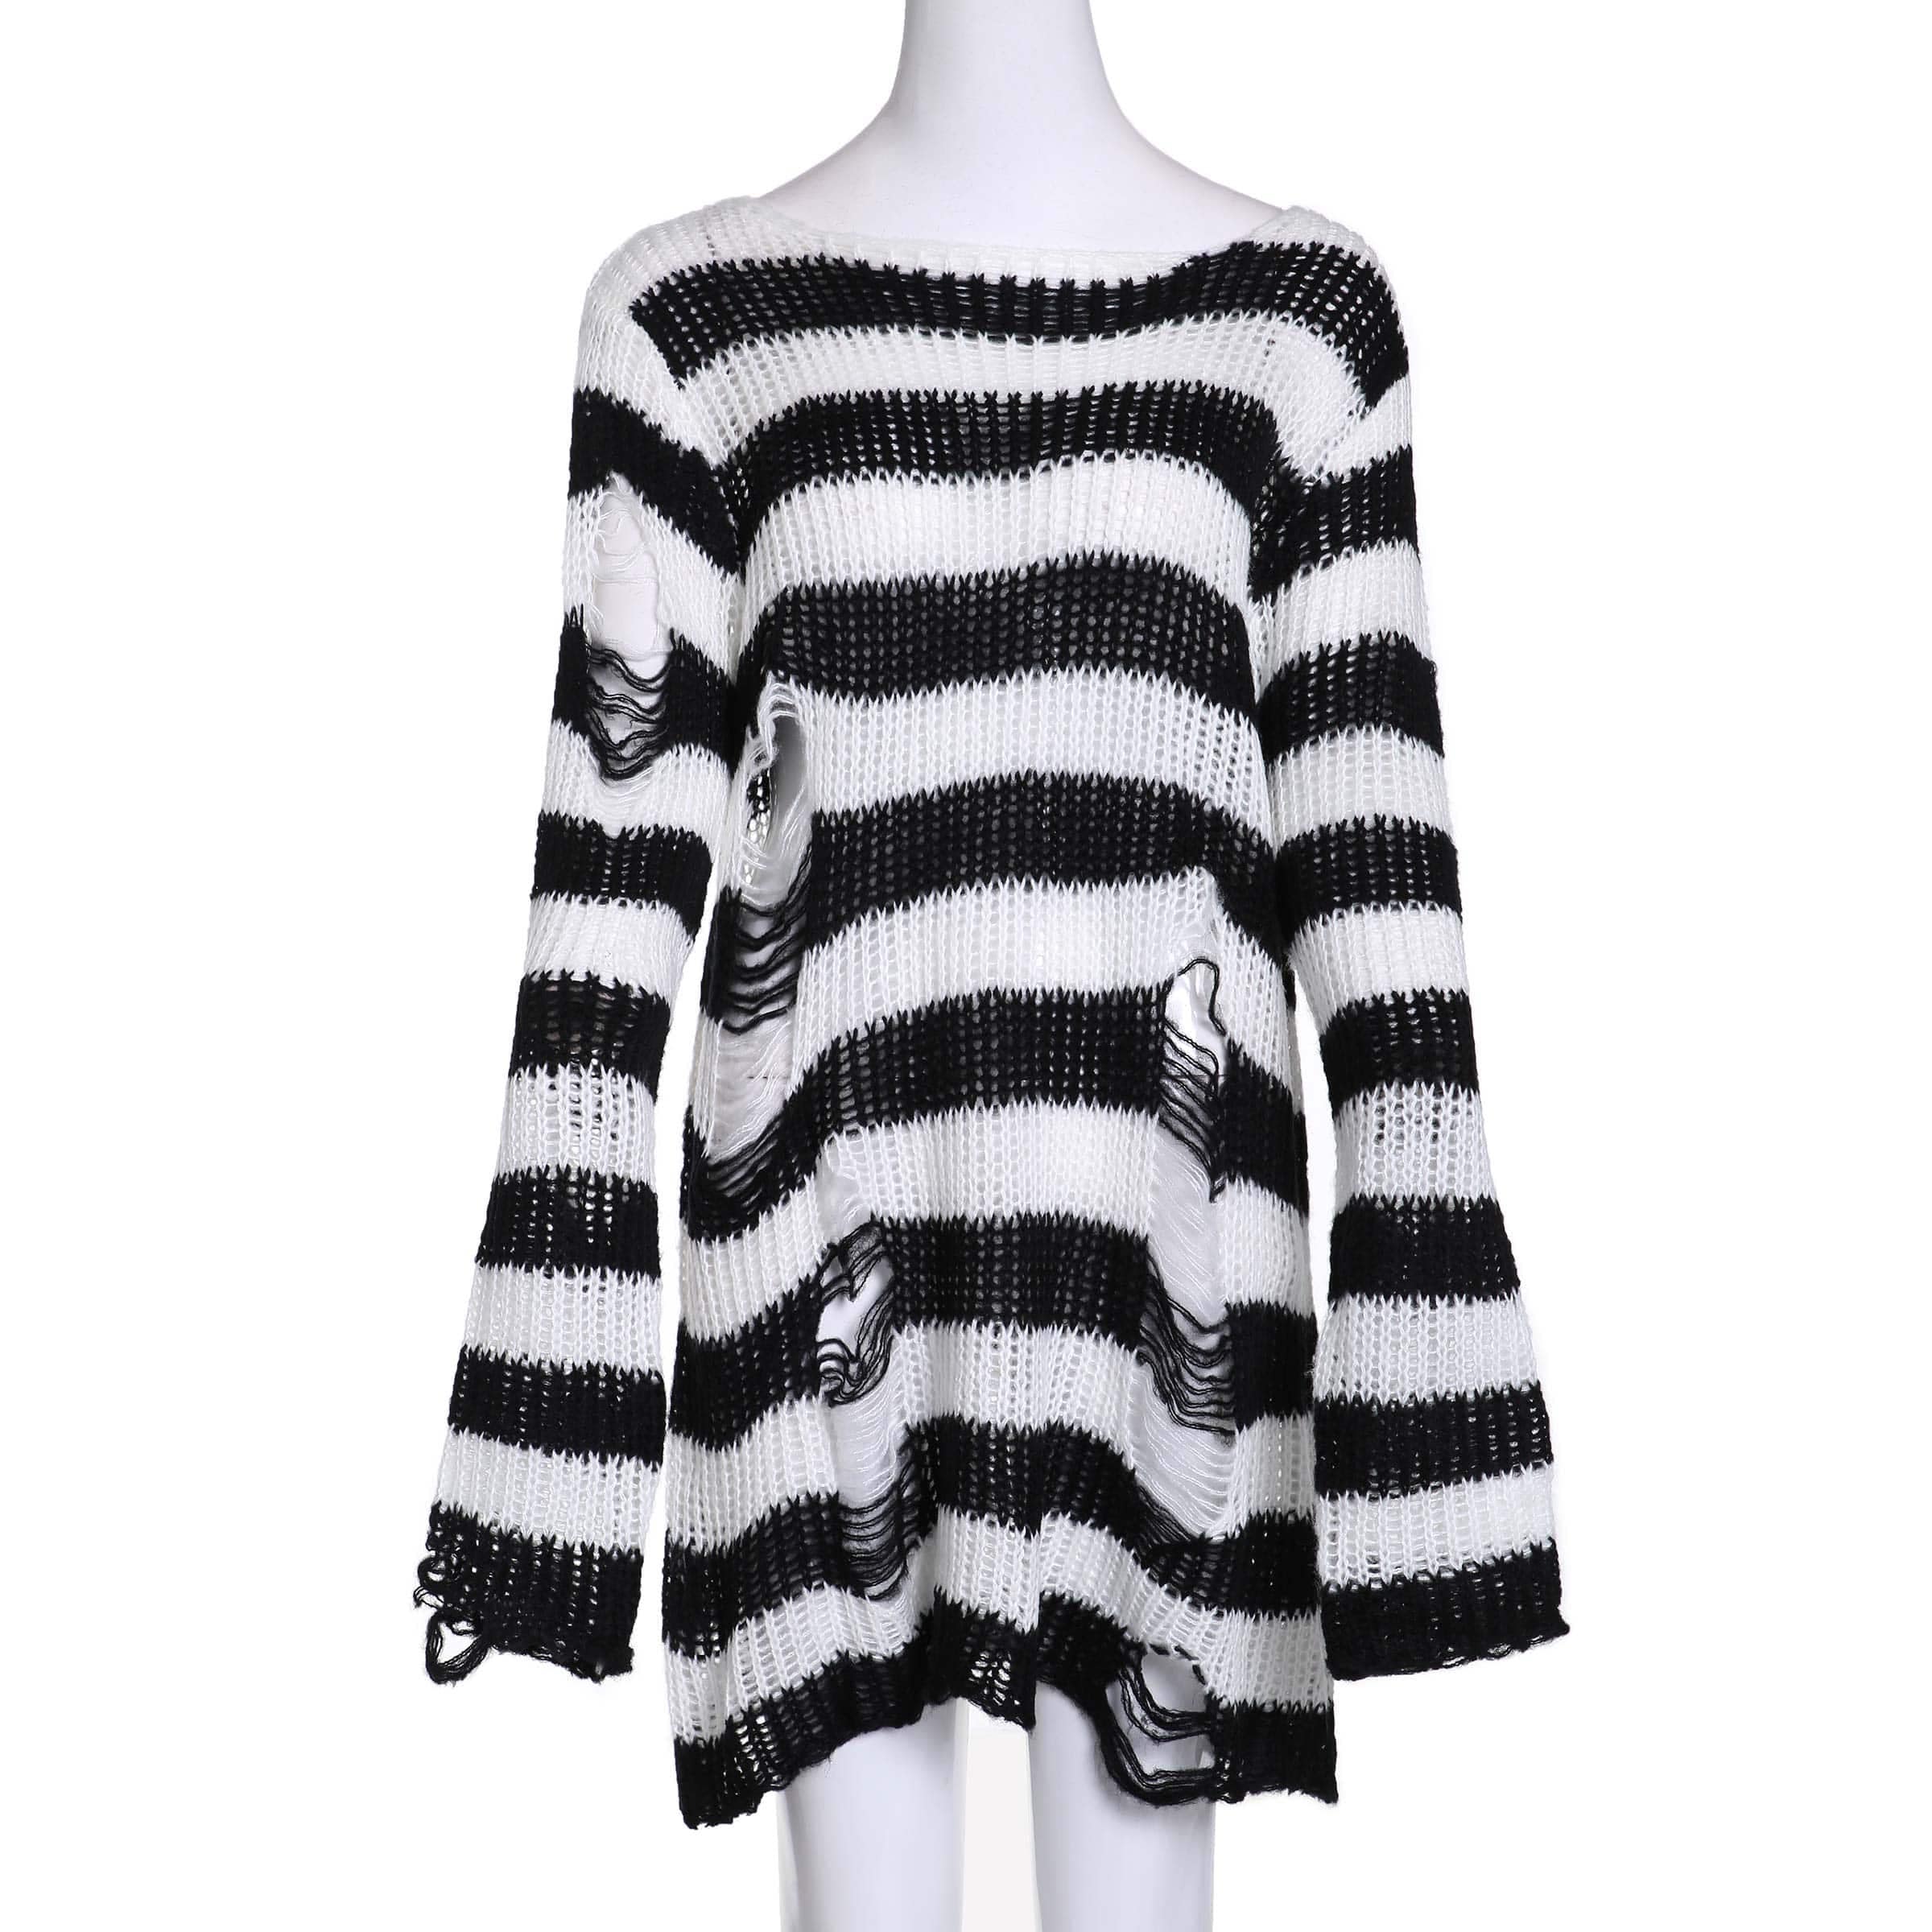 Striped Distressed Sweater Goth Gothic Punk Ripped Aesthetic | Etsy